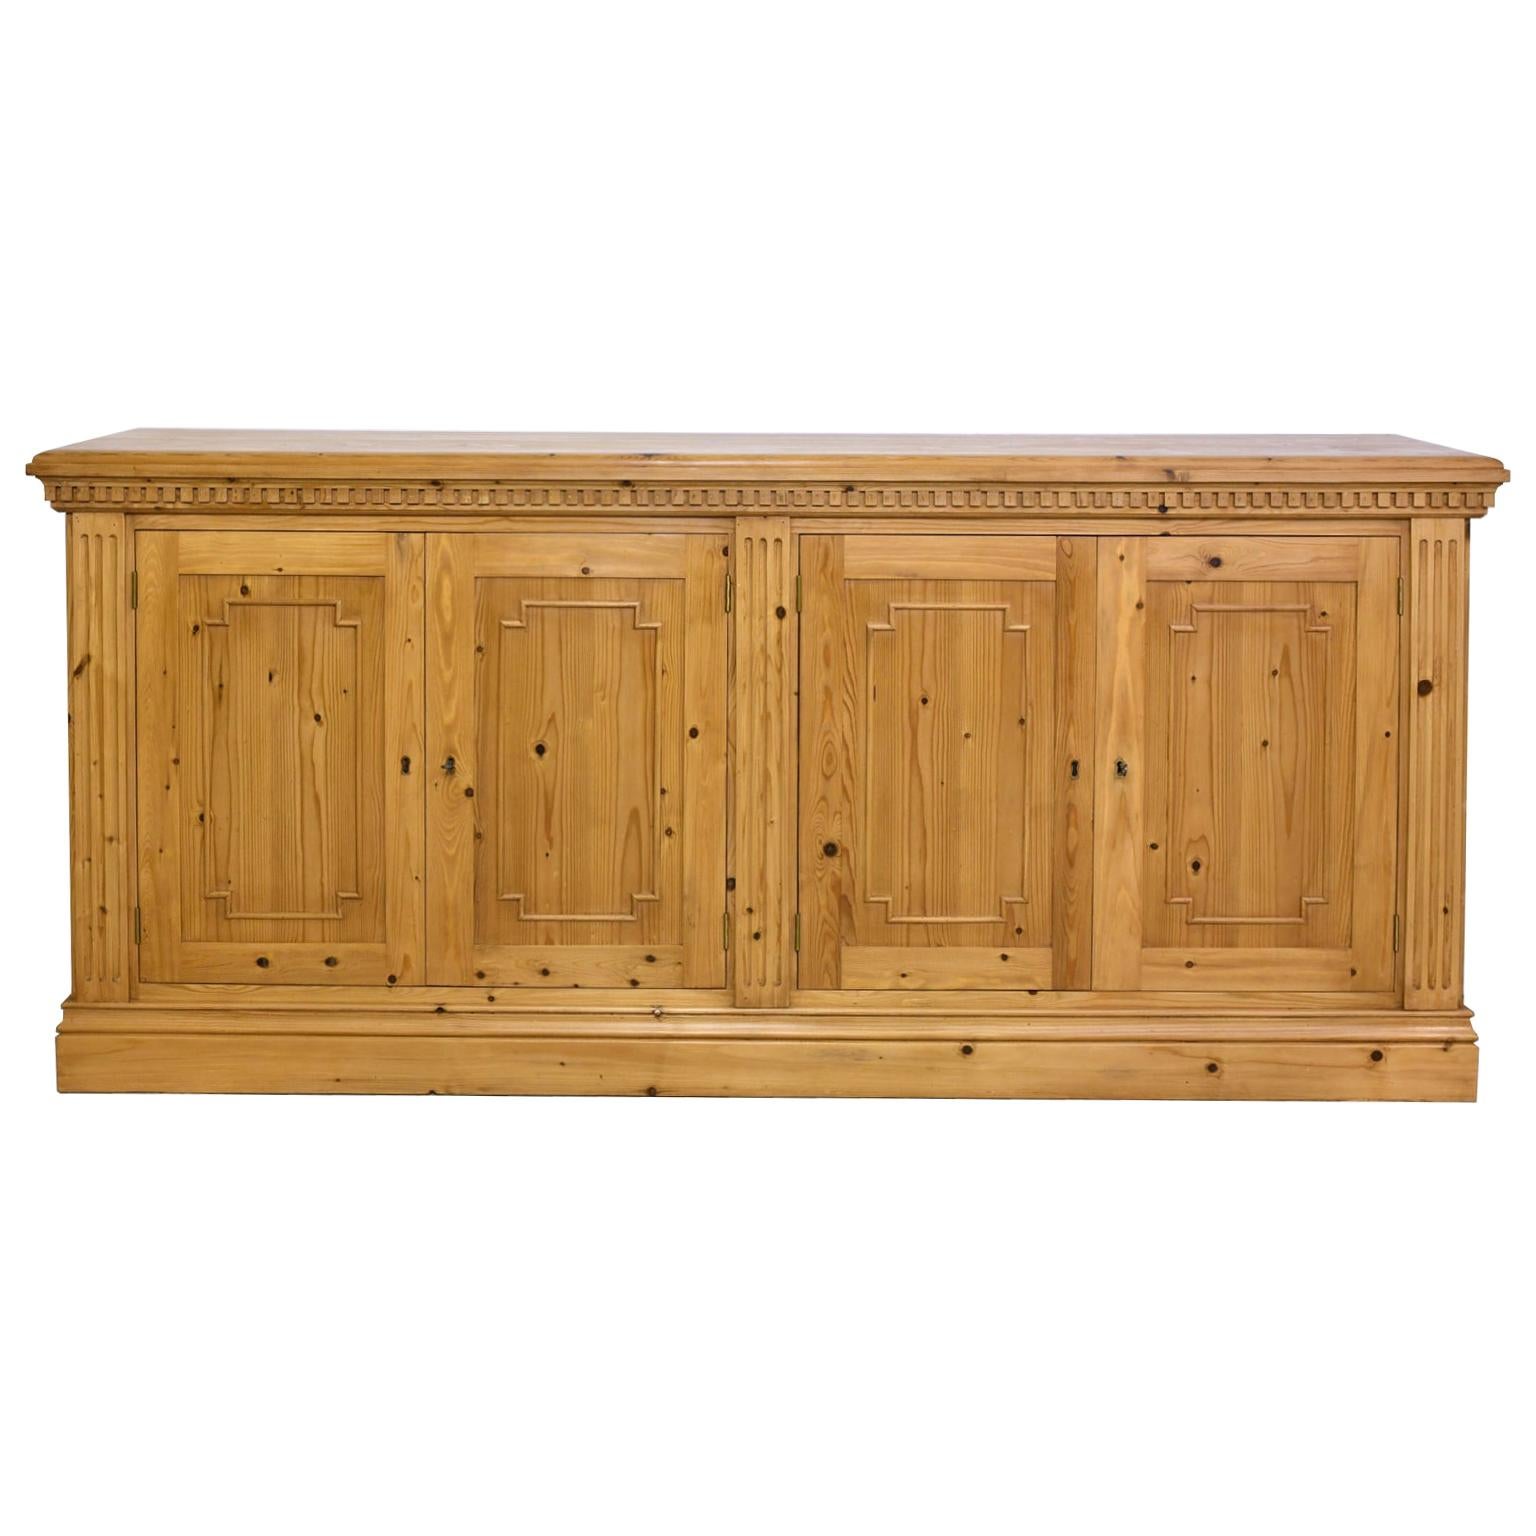 Bonnin Ashley Custom-Made English-Style Sideboard / Credenza in Repurposed Pine For Sale